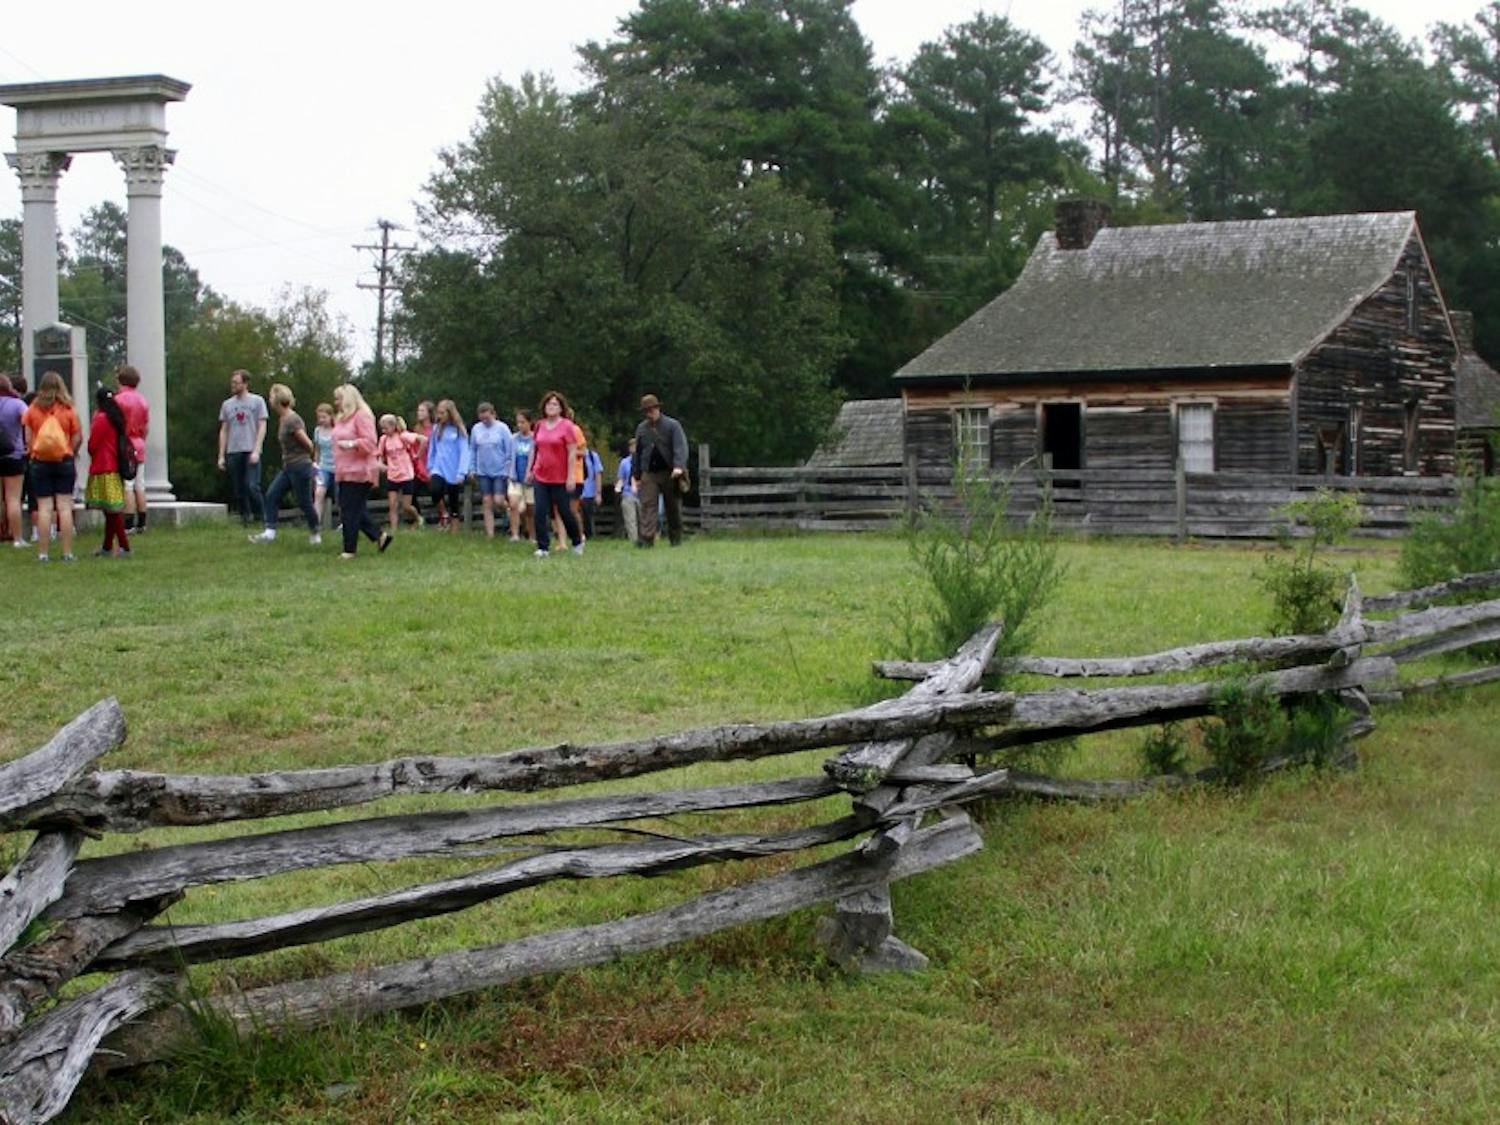 With the local historical site in danger of being sold to developers, North Carolina is trying to raise funds to buy the land itself and preserve it.